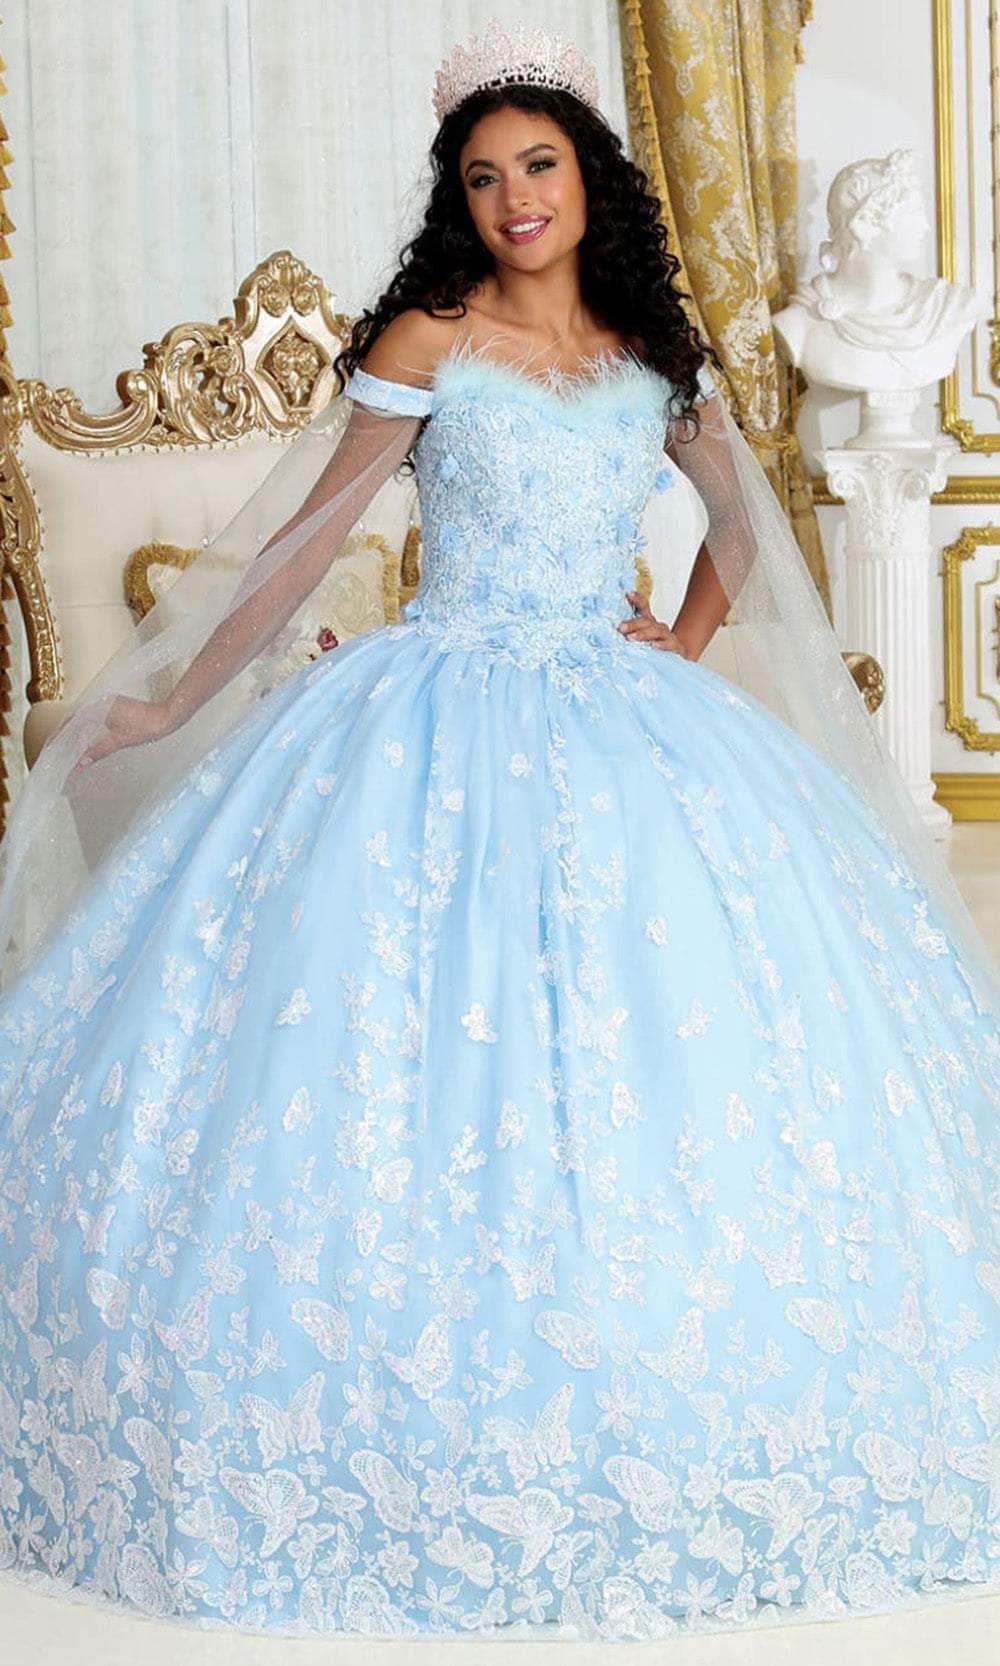 Image of May Queen LK197 - Feather Trimmed Ballgown